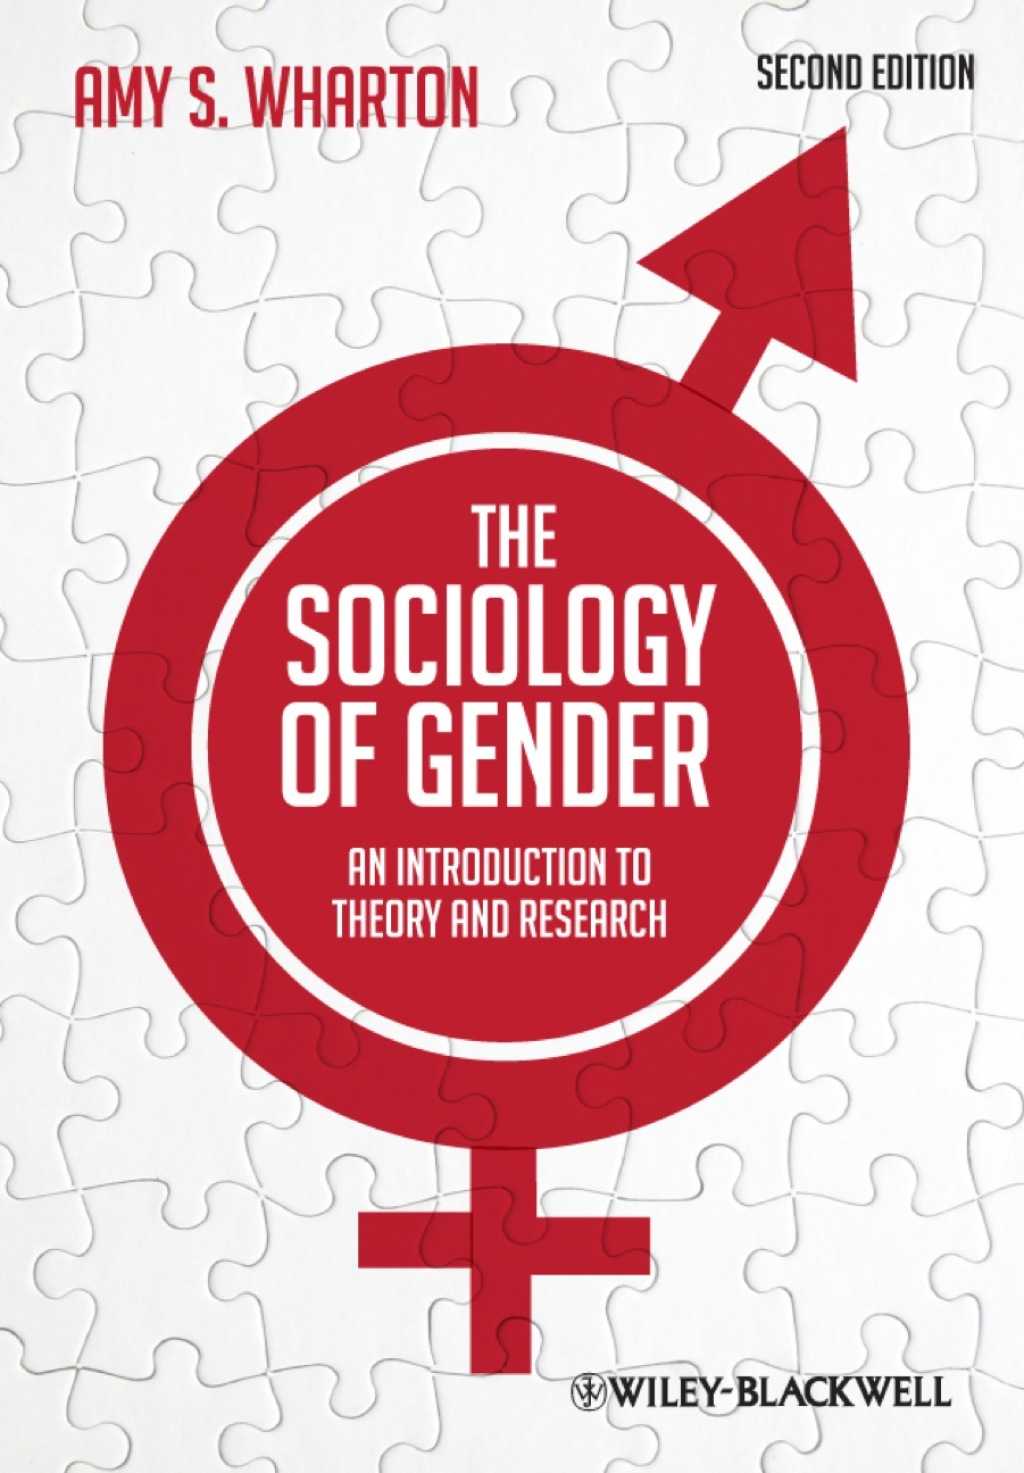 The Sociology of Gender: An Introduction to Theory and Research (eBook) - Amy S. Wharton